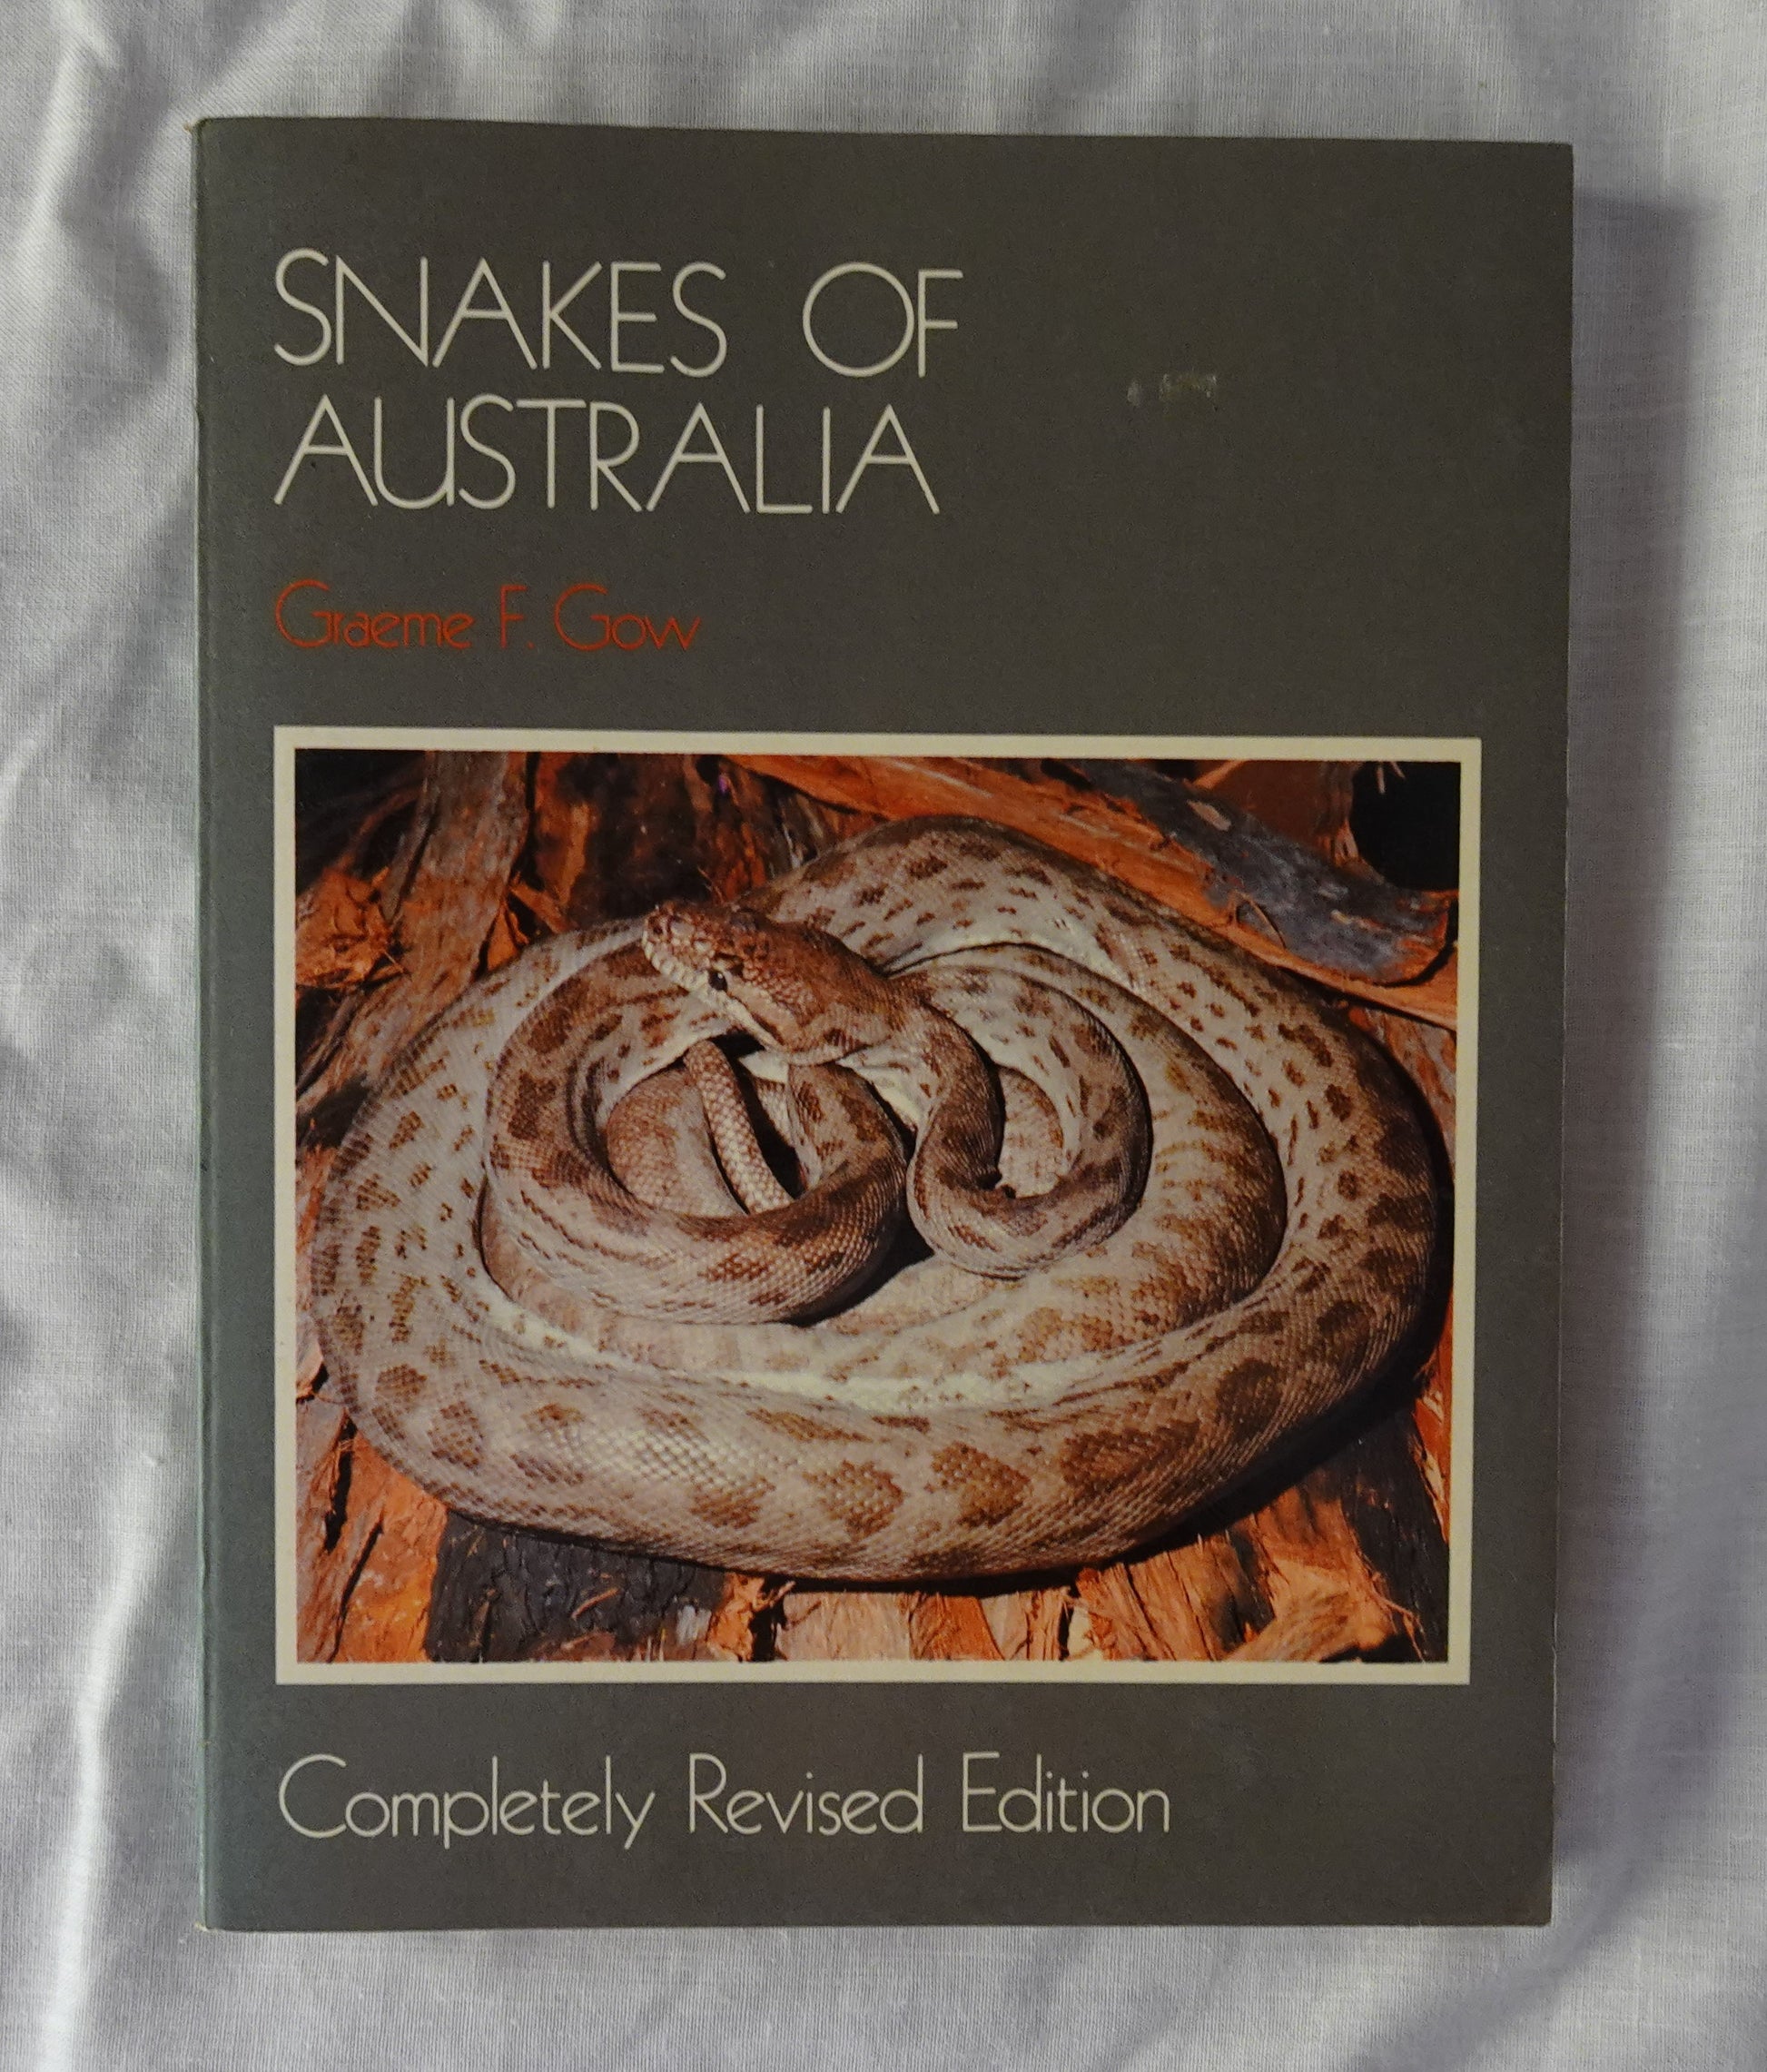 Snakes of Australia  Completely Revised Edition  by Graeme F. Gow